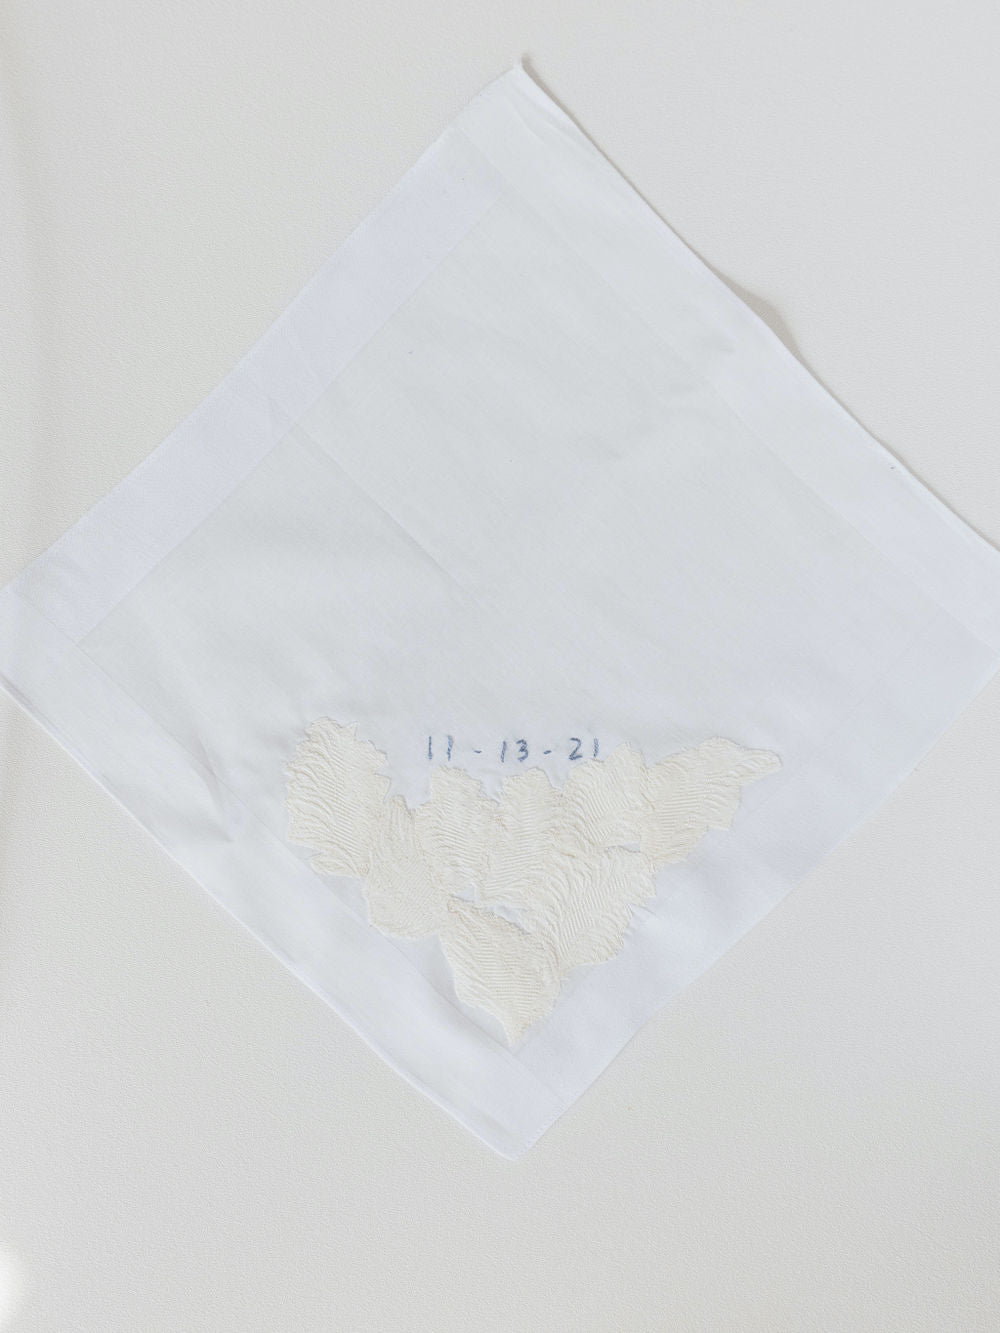 customized wedding handkerchief heirloom handmade with mother's wedding dress sleeves and personalized embroidery by The Garter Girl